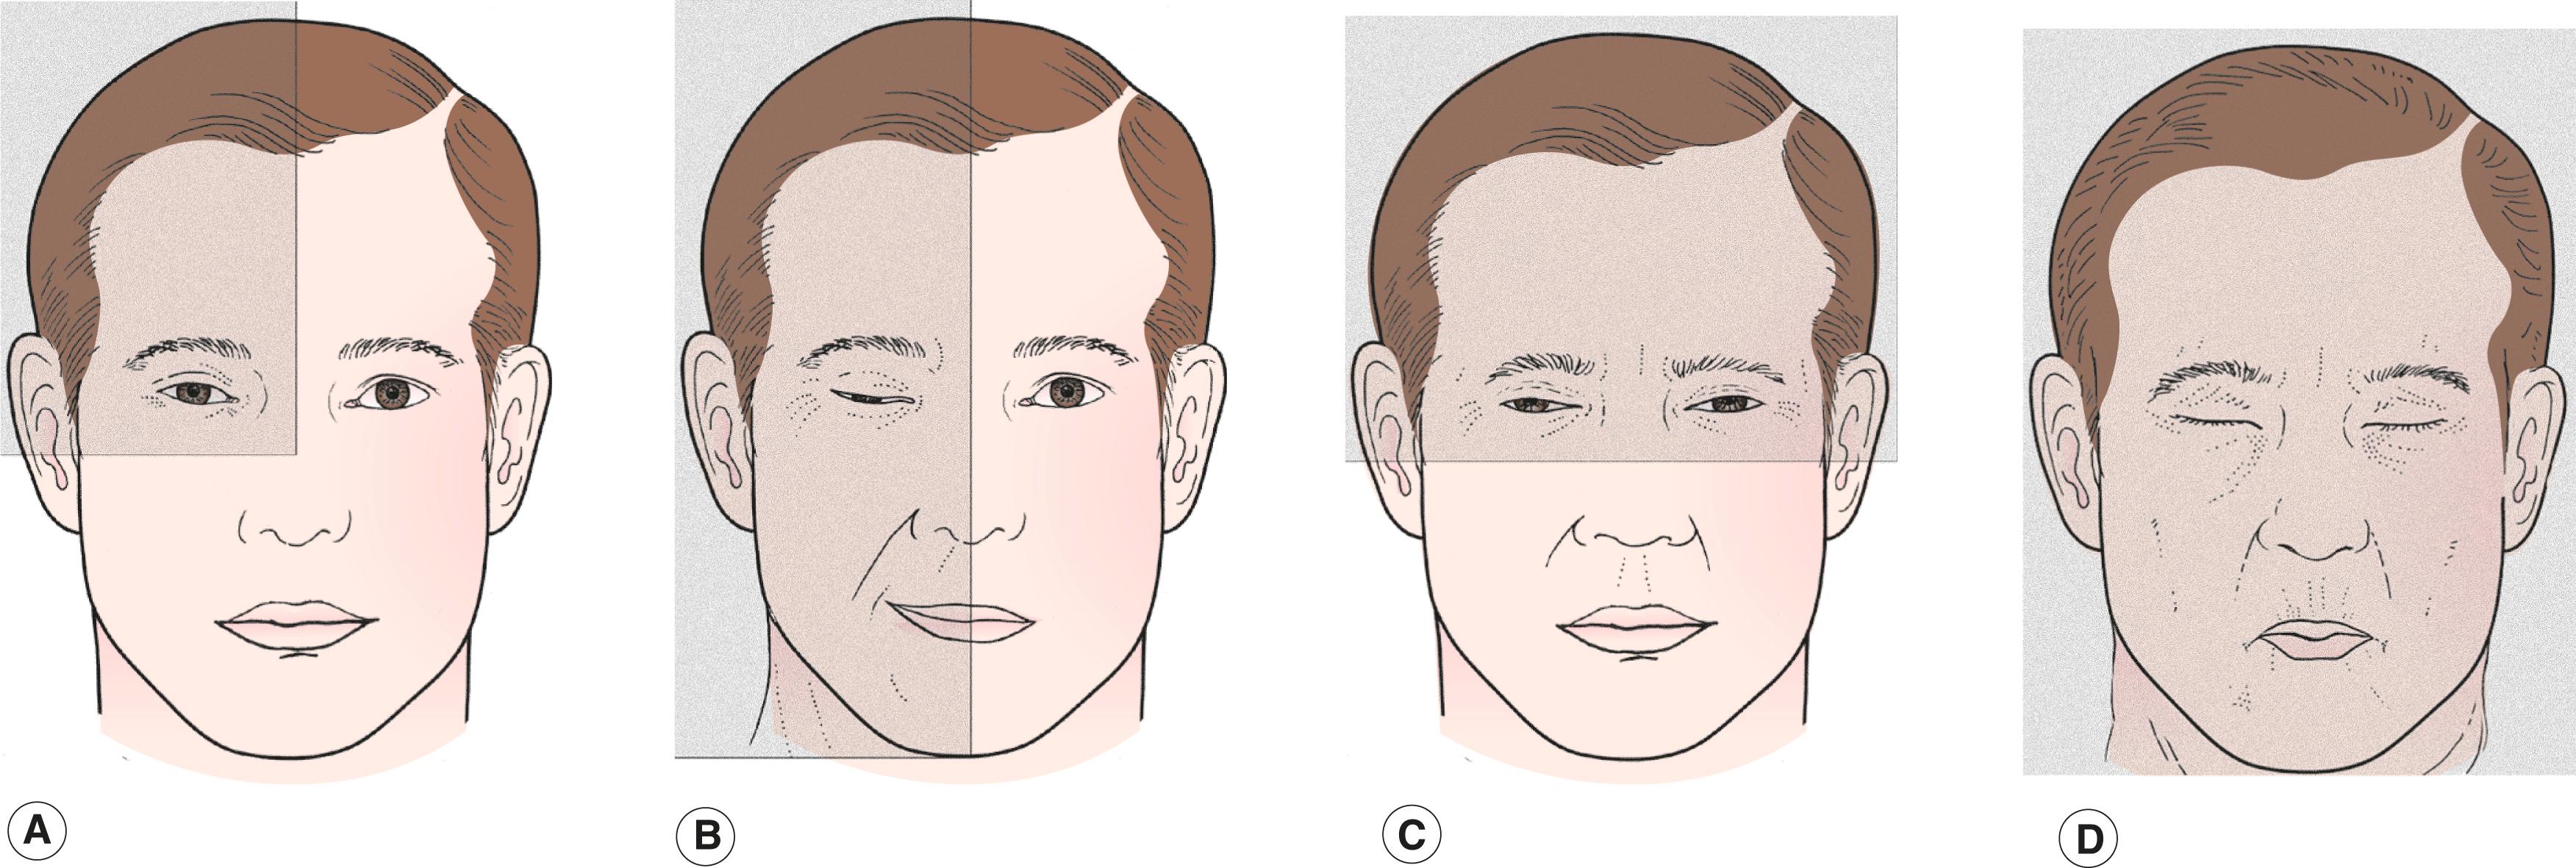 Figure 9.9, The diagnosis of facial spasm. Divide the face into quadrants to determine the diagnosis. ( A ) Orbicularis myokymia: one quadrant of face; spasm limited to a few muscle fibers on the upper or lower lid. ( B ) Hemifacial spasm: two quadrants, entire side of face; intermittent spasm of one side of the face, including all branches of the facial nerve. Look for subtle involvement of the chin, neck, and brow. ( C ) Essential blepharospasm: two quadrants, upper half of face; bilateral involuntary closure or spasm of eyelids, including orbital orbicularis and corrugator superciliaris. ( D ) Meige syndrome: four quadrants, entire face and often neck; essential blepharospasm and lower facial involvement, pursing of lips is common.